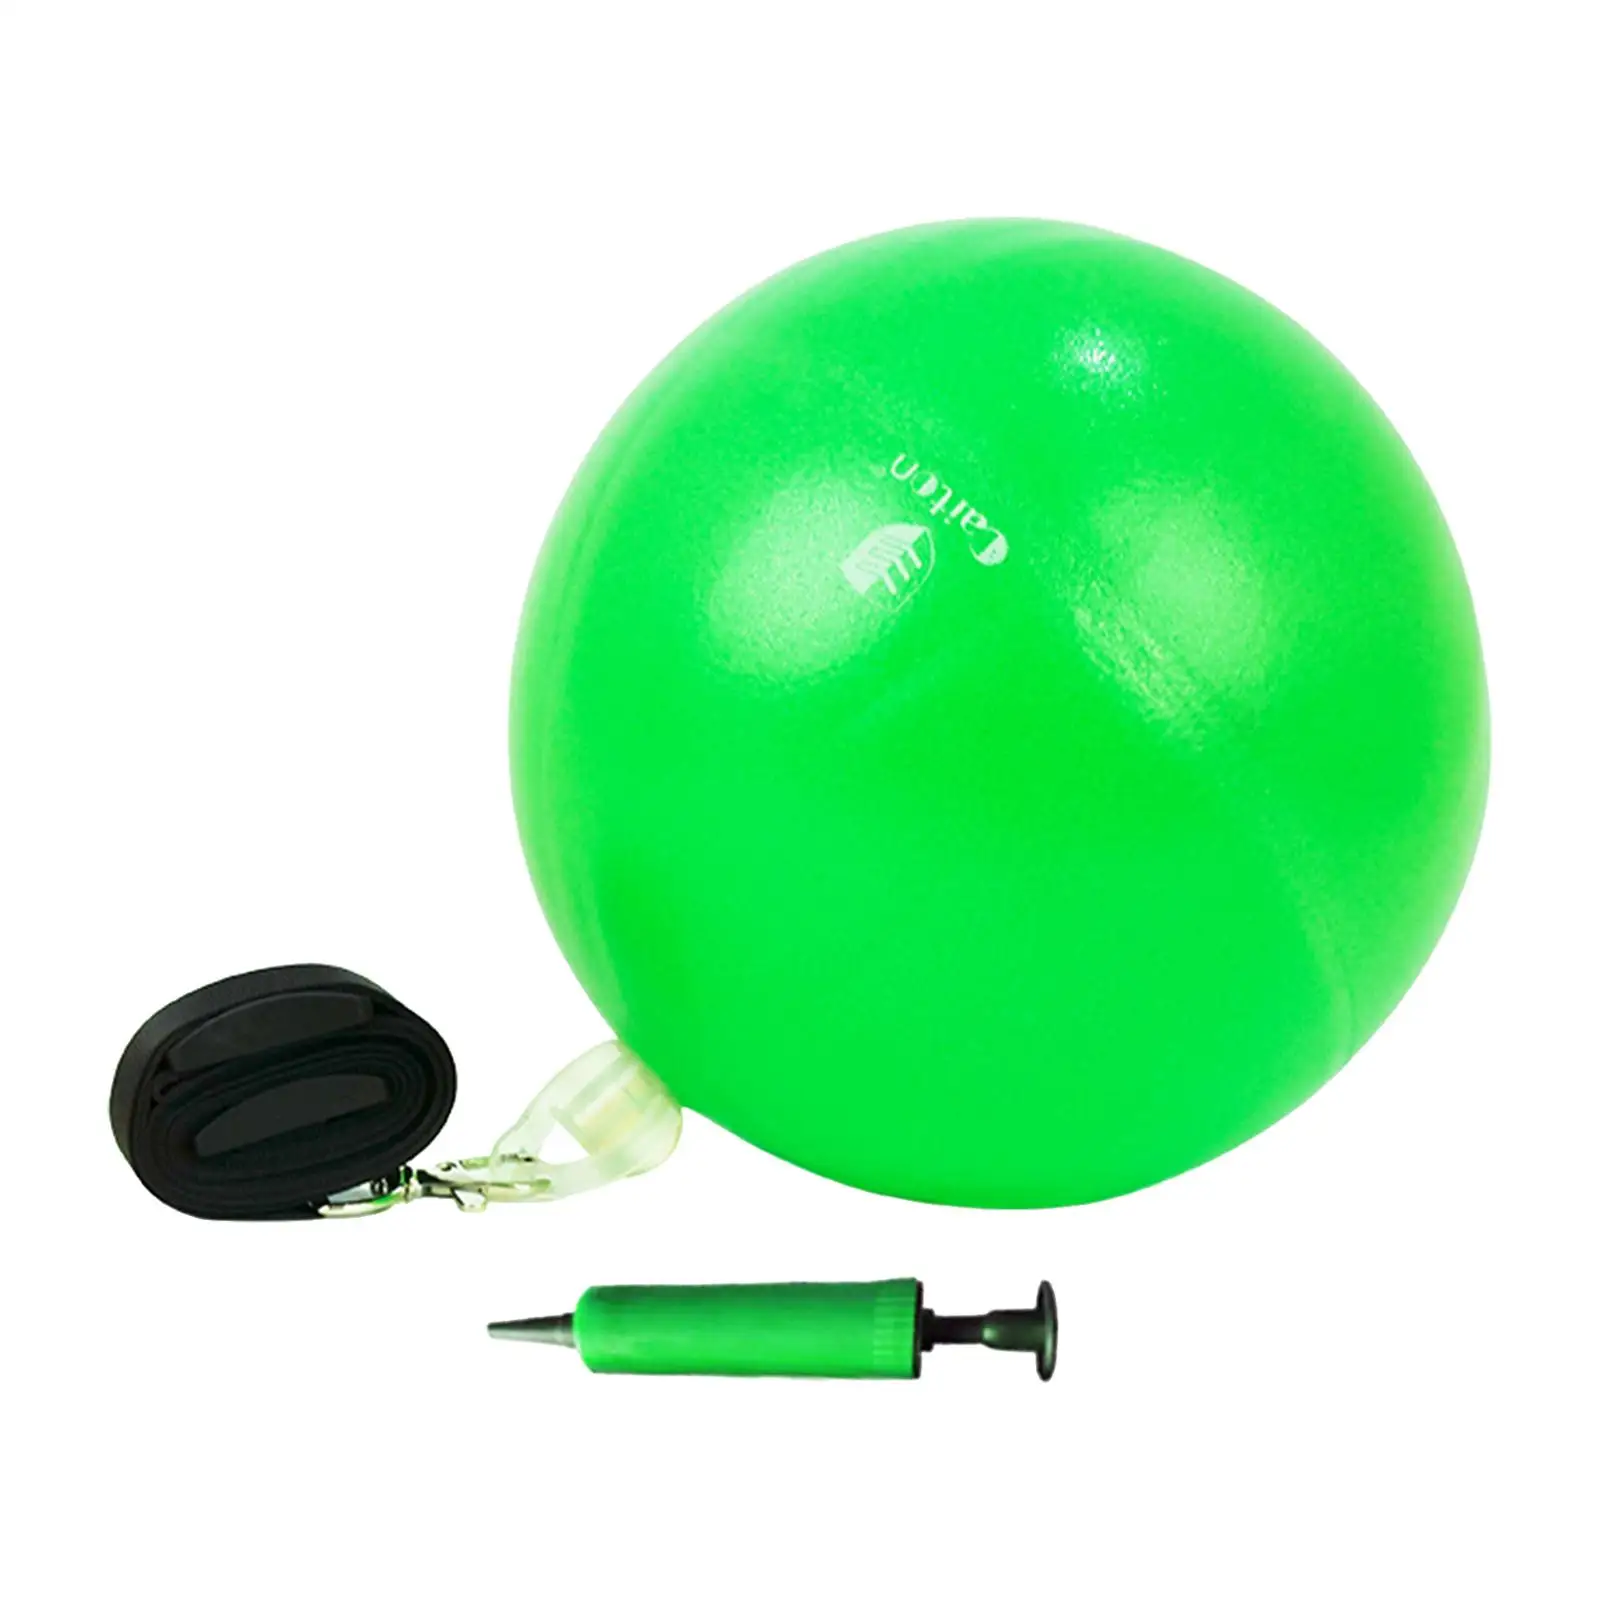 Professional ball Golf Swing Training Aid Motion Correction W/ Adjustable Lanyard Assist for Posture Correction Practing